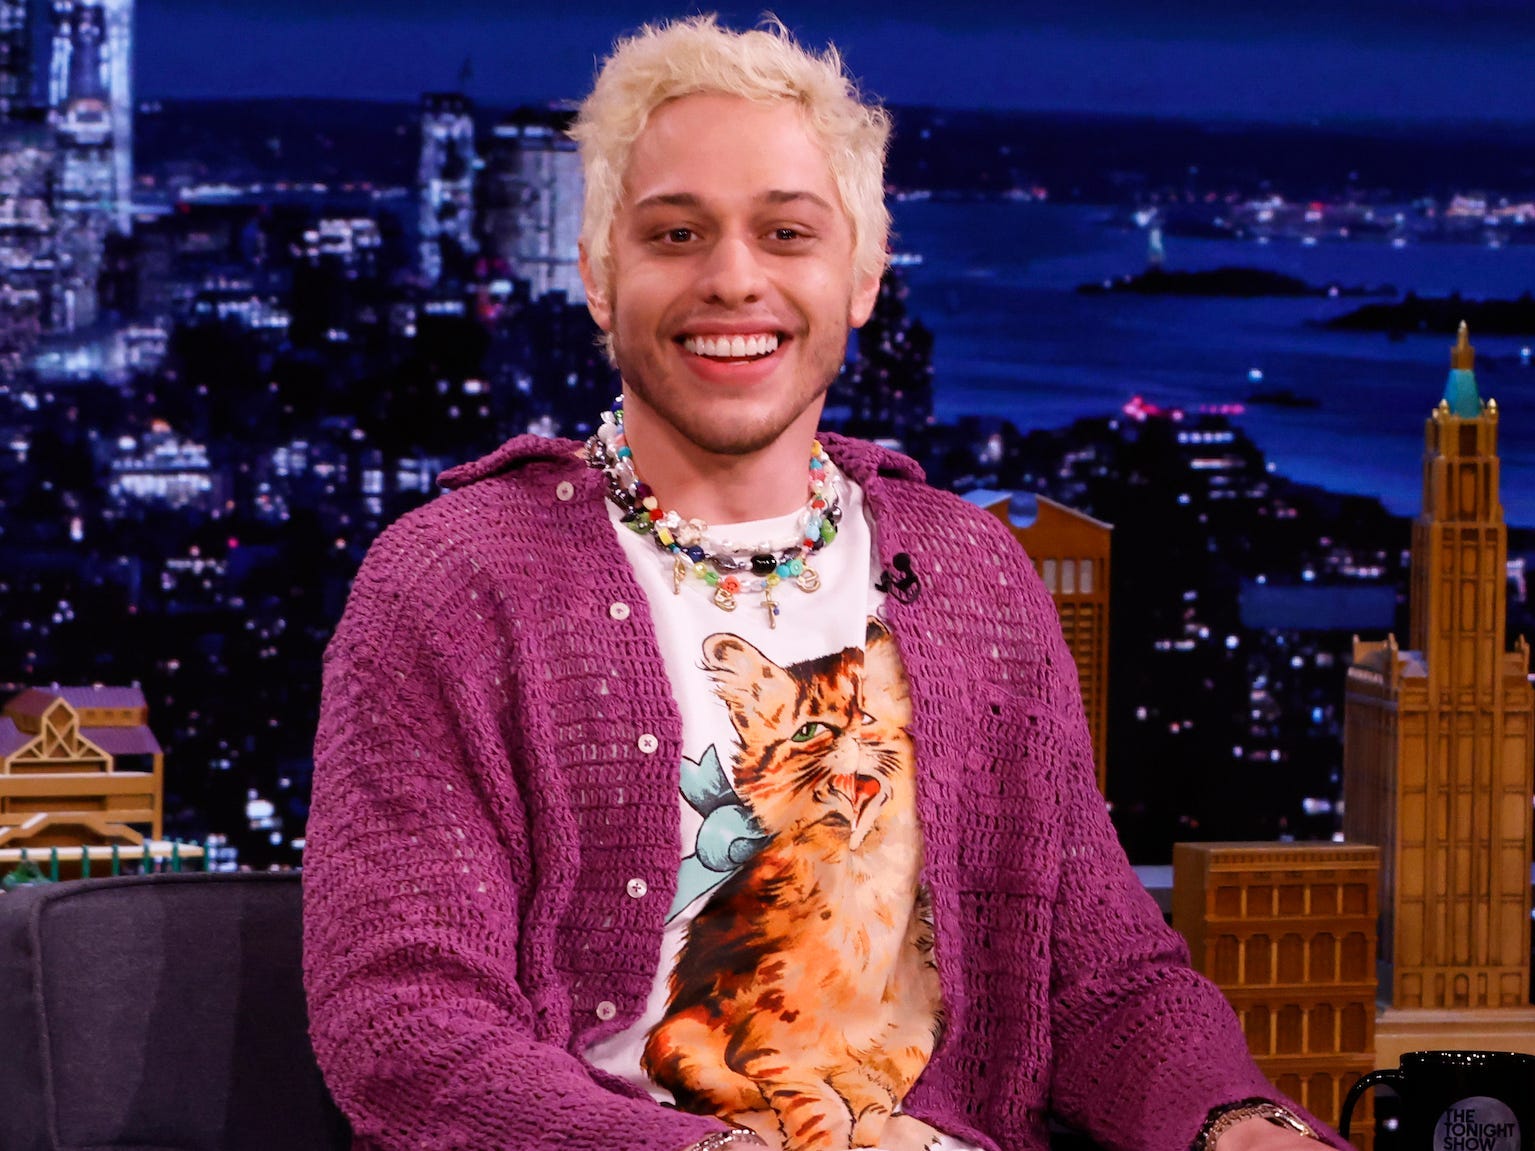 Comedian Pete Davidson during an interview on Wednesday, September 8, 2021 -- (Photo By: Alex Hooks/NBC/NBCU Photo Bank via Getty Images)